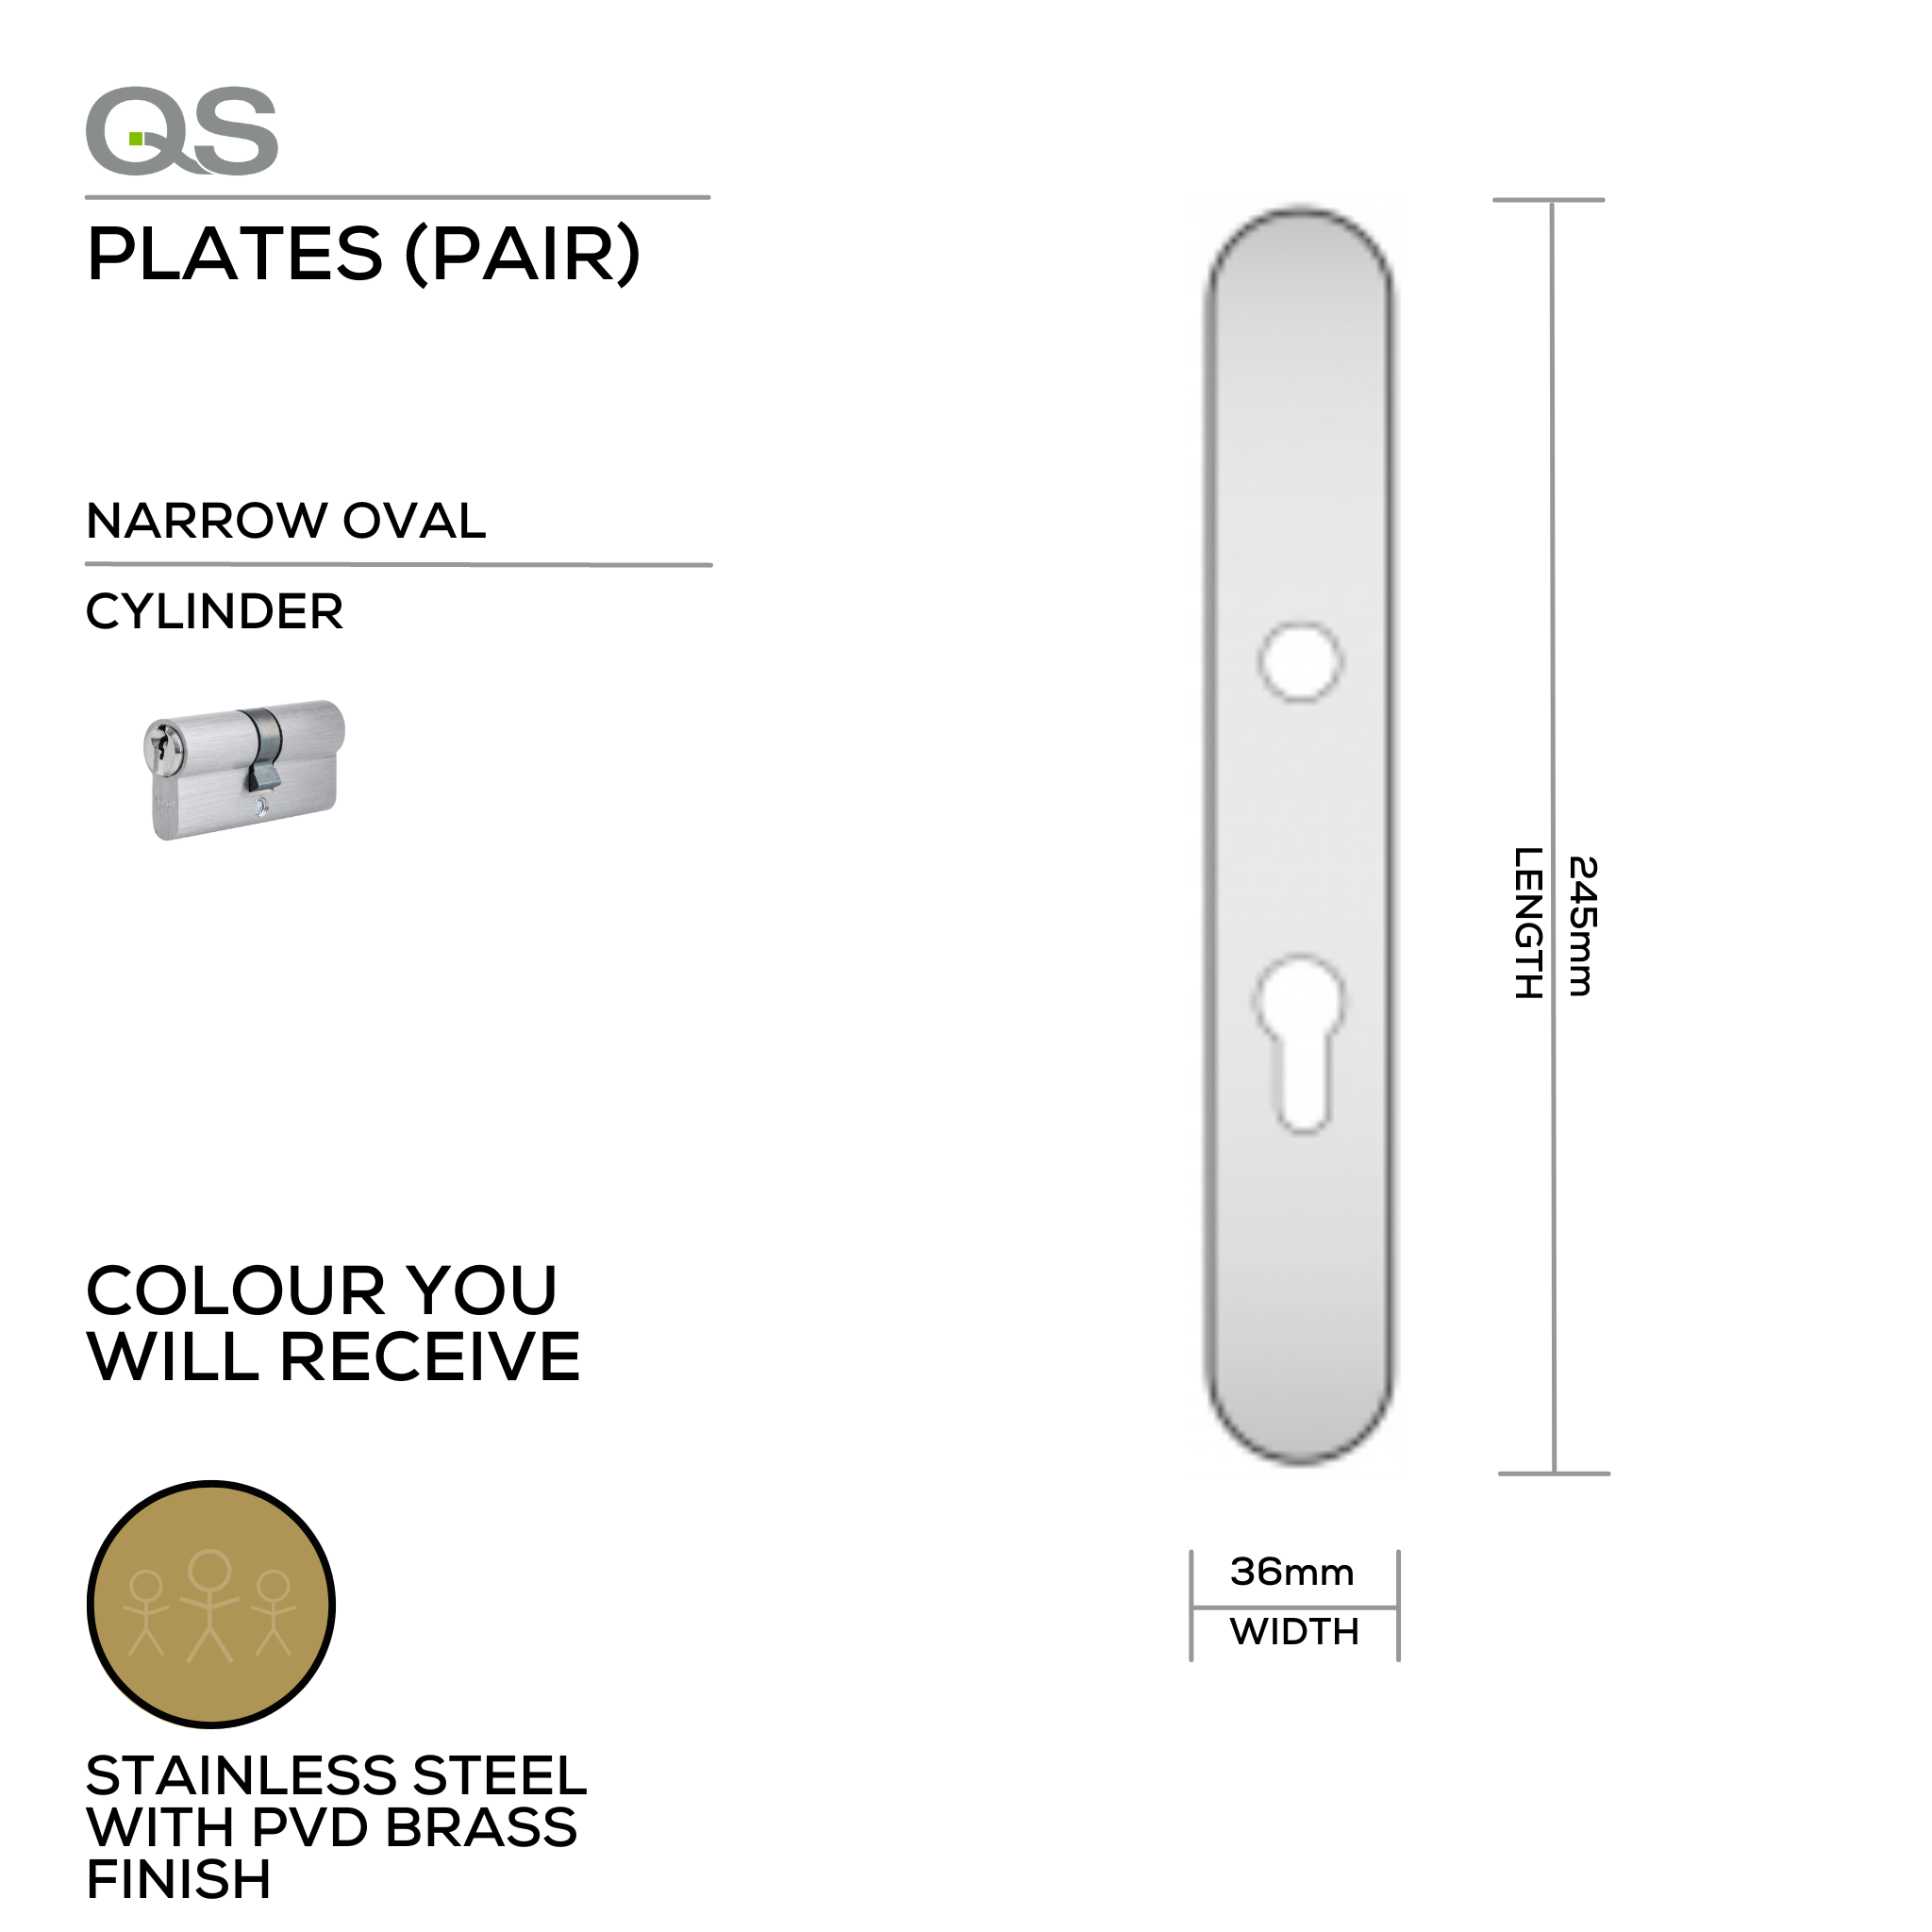 QS4483 PVD CYL, Plate, Cylinder, Narrow Oval, Supplied with QS Handle, PVD Brass, QS